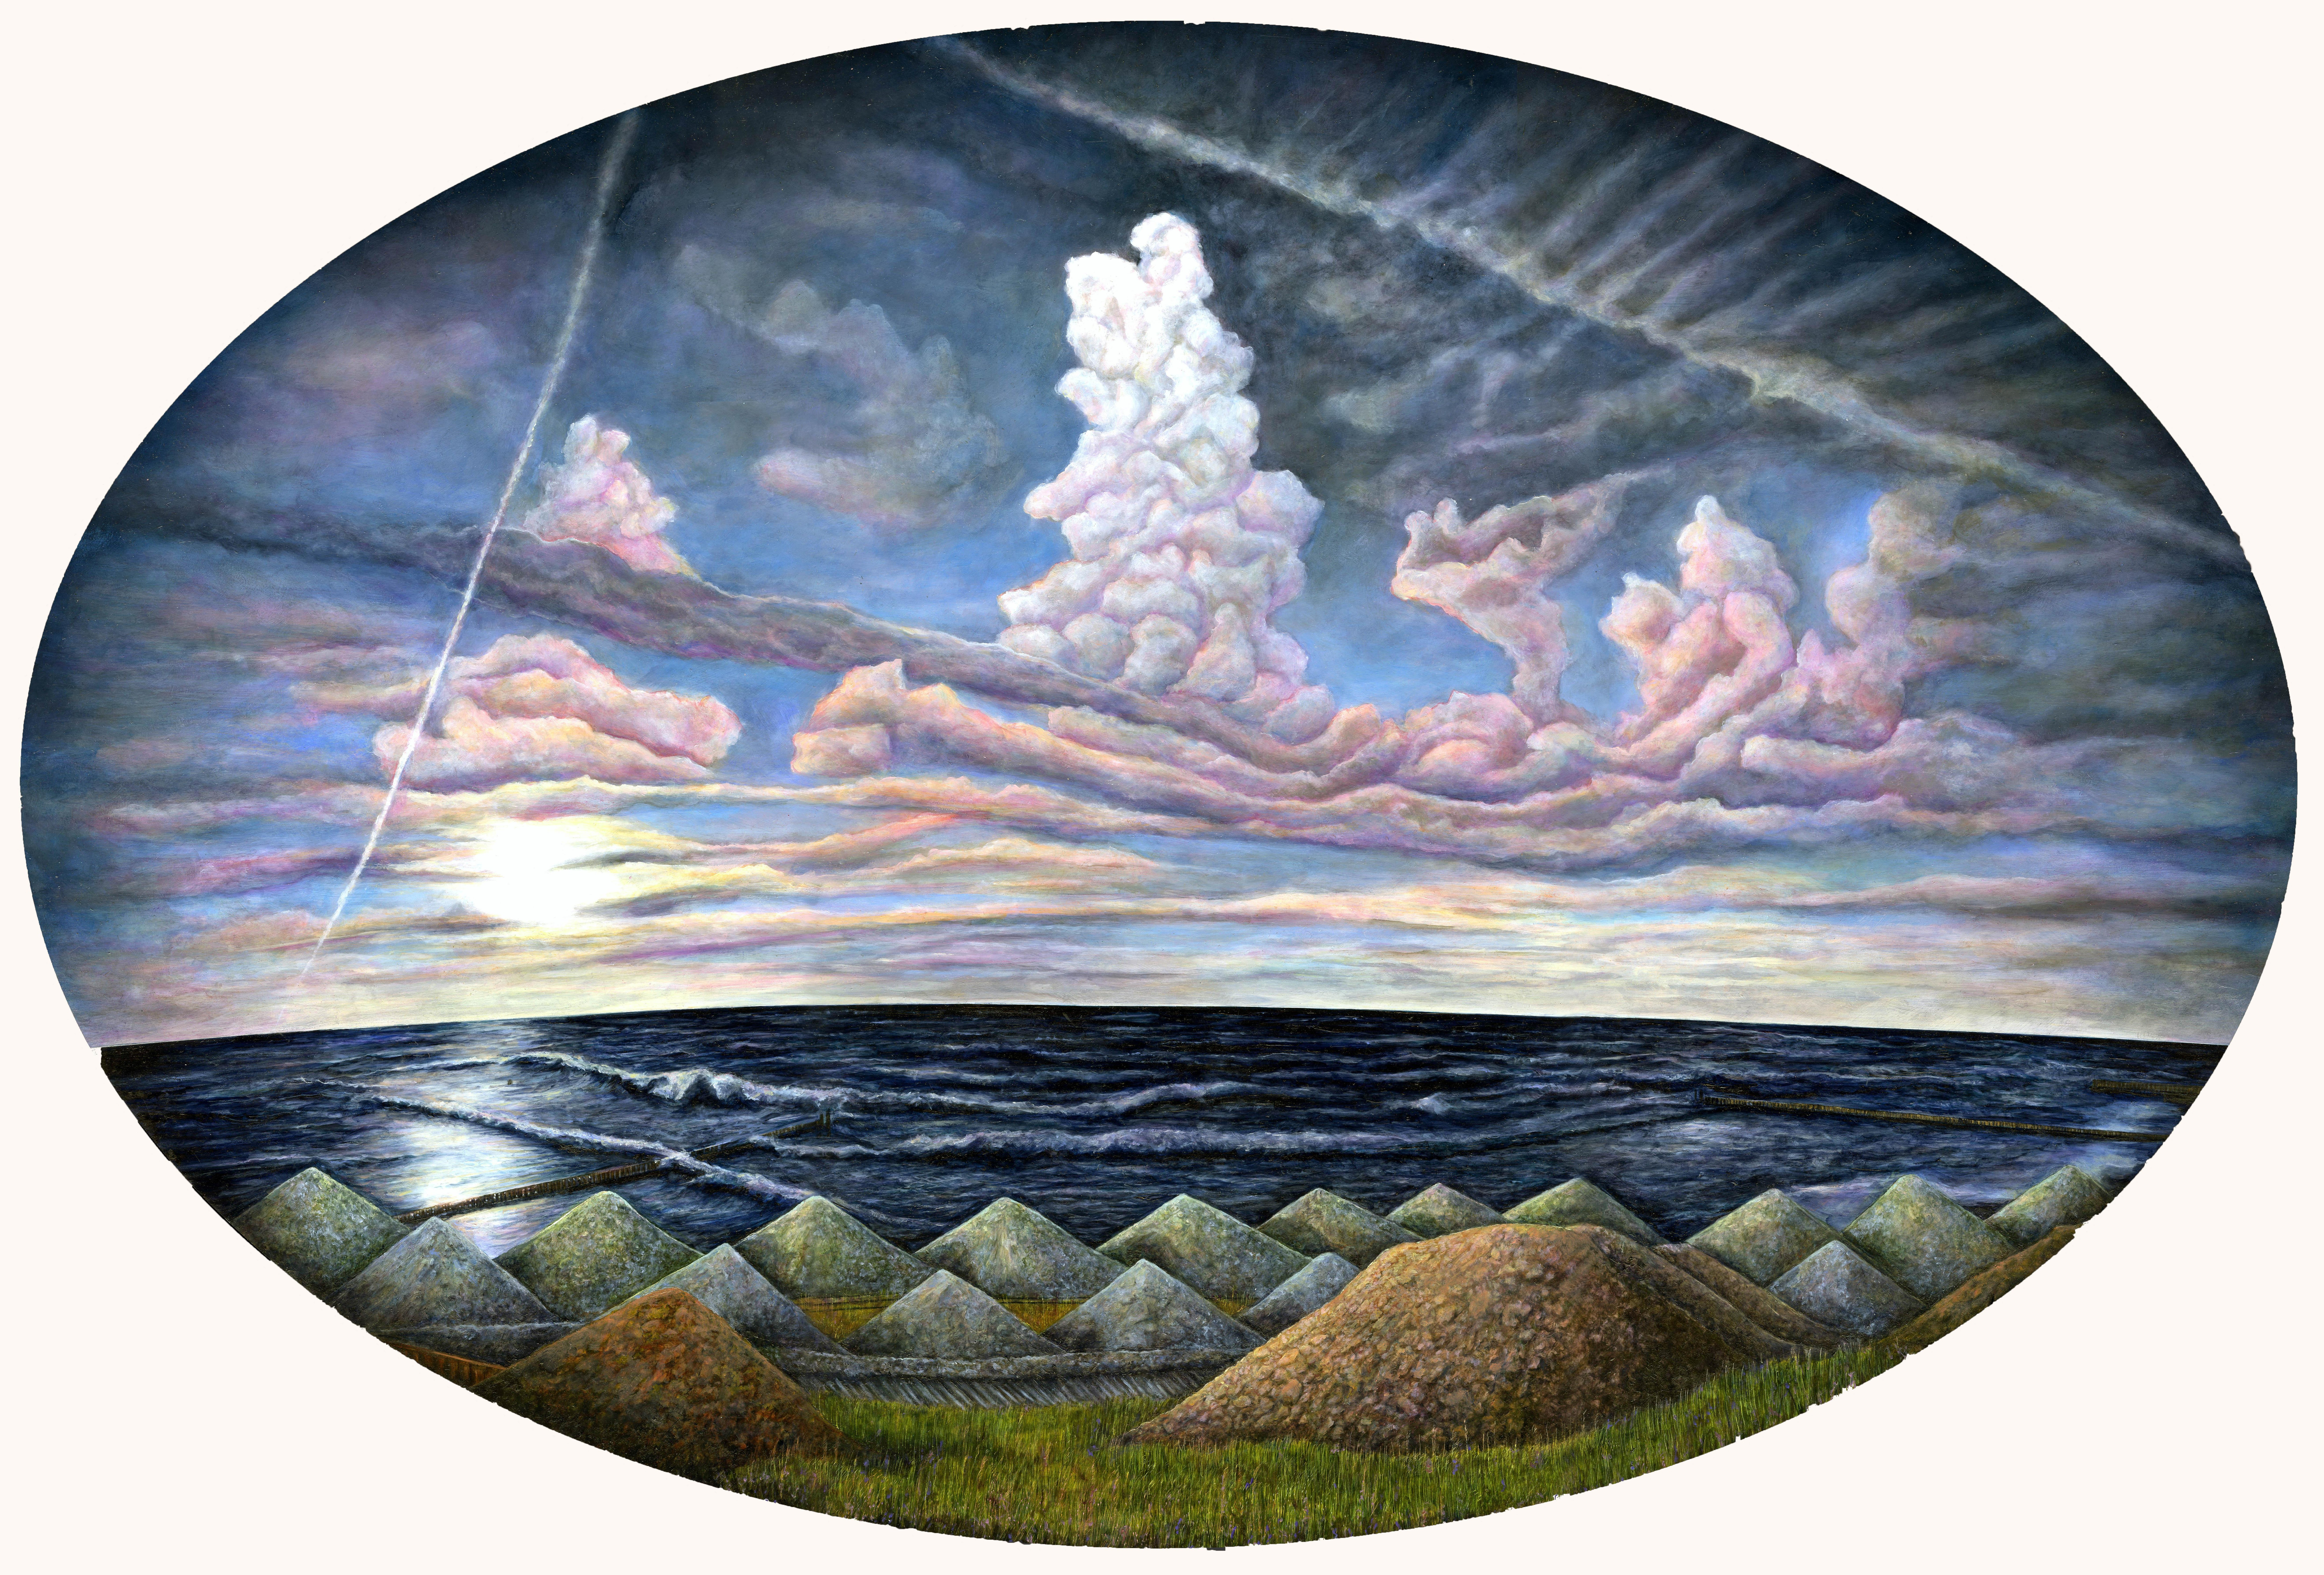 Mark Bowers Landscape Painting - Homeward Bound, Surreal Landscape with Midnight Blue Water and Pink/Blue Sky.